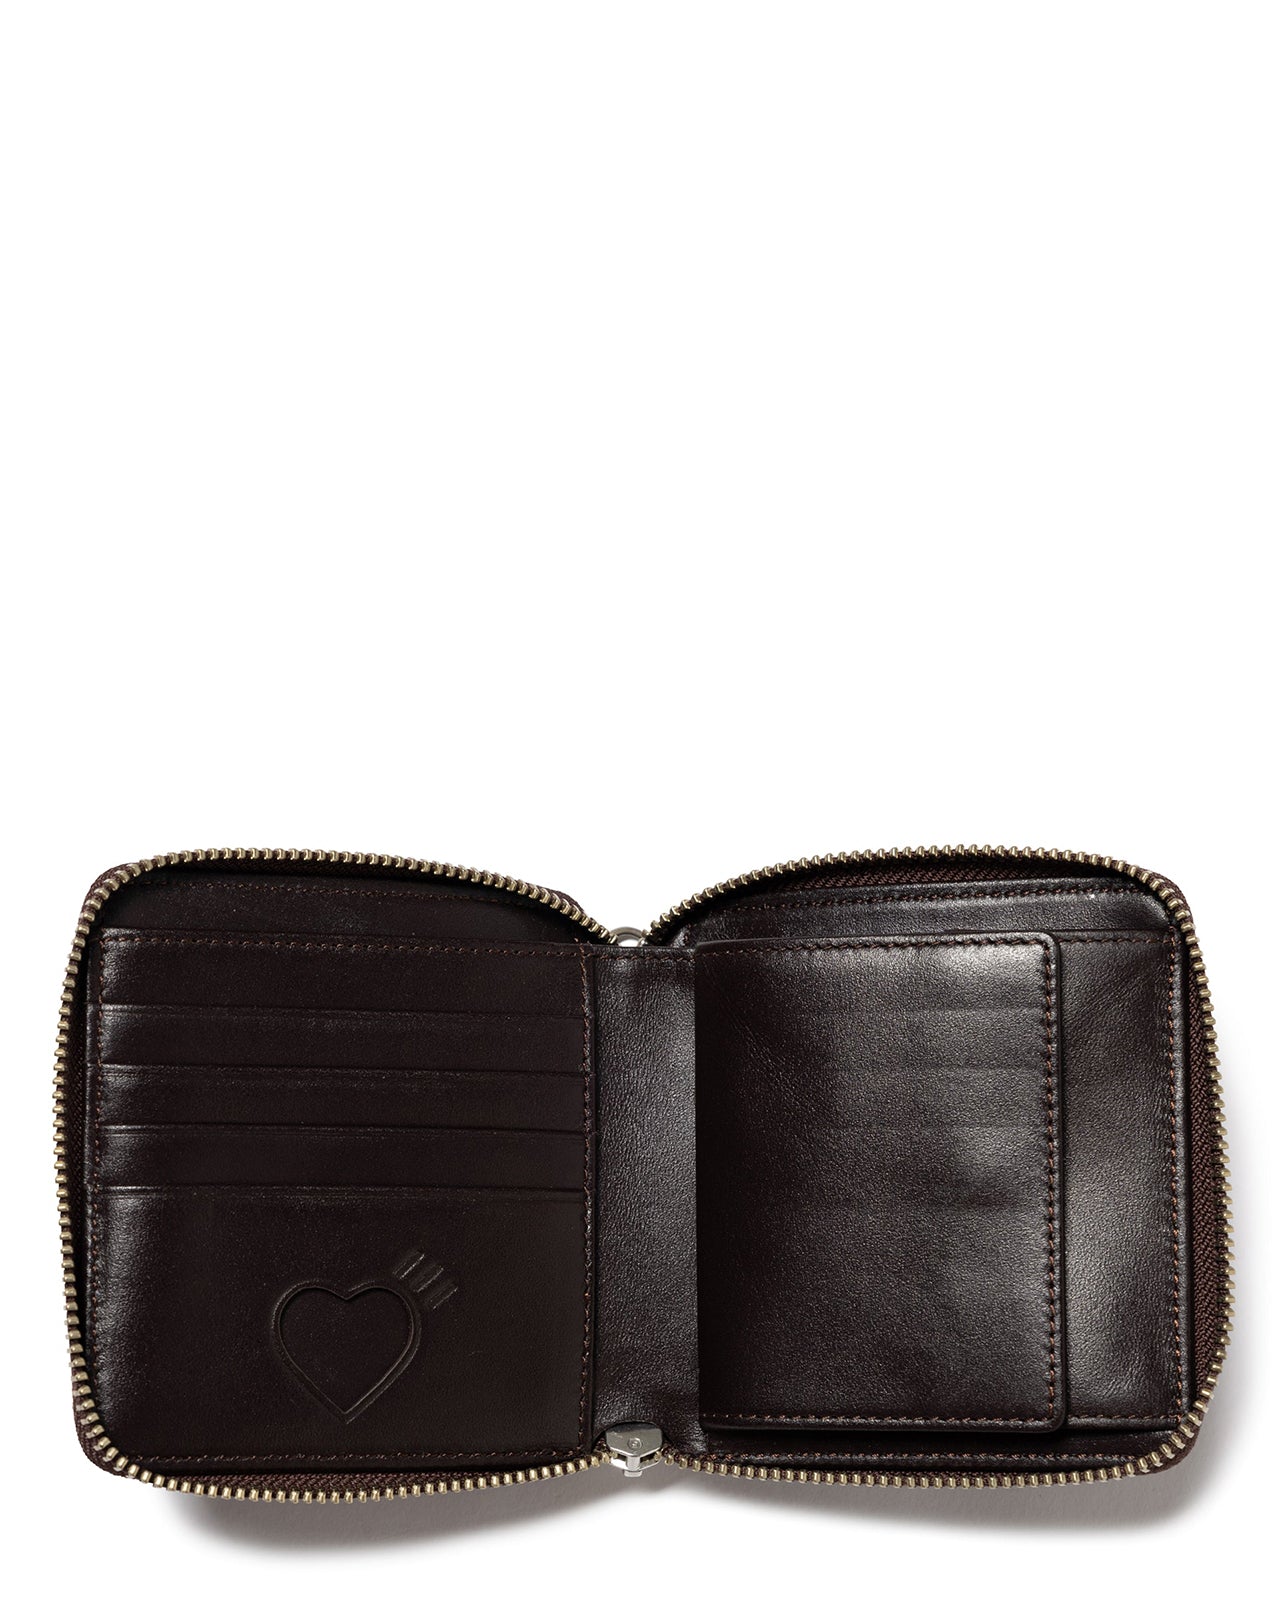 HUMAN MADE LARGE LEATHER WALLET - 長財布